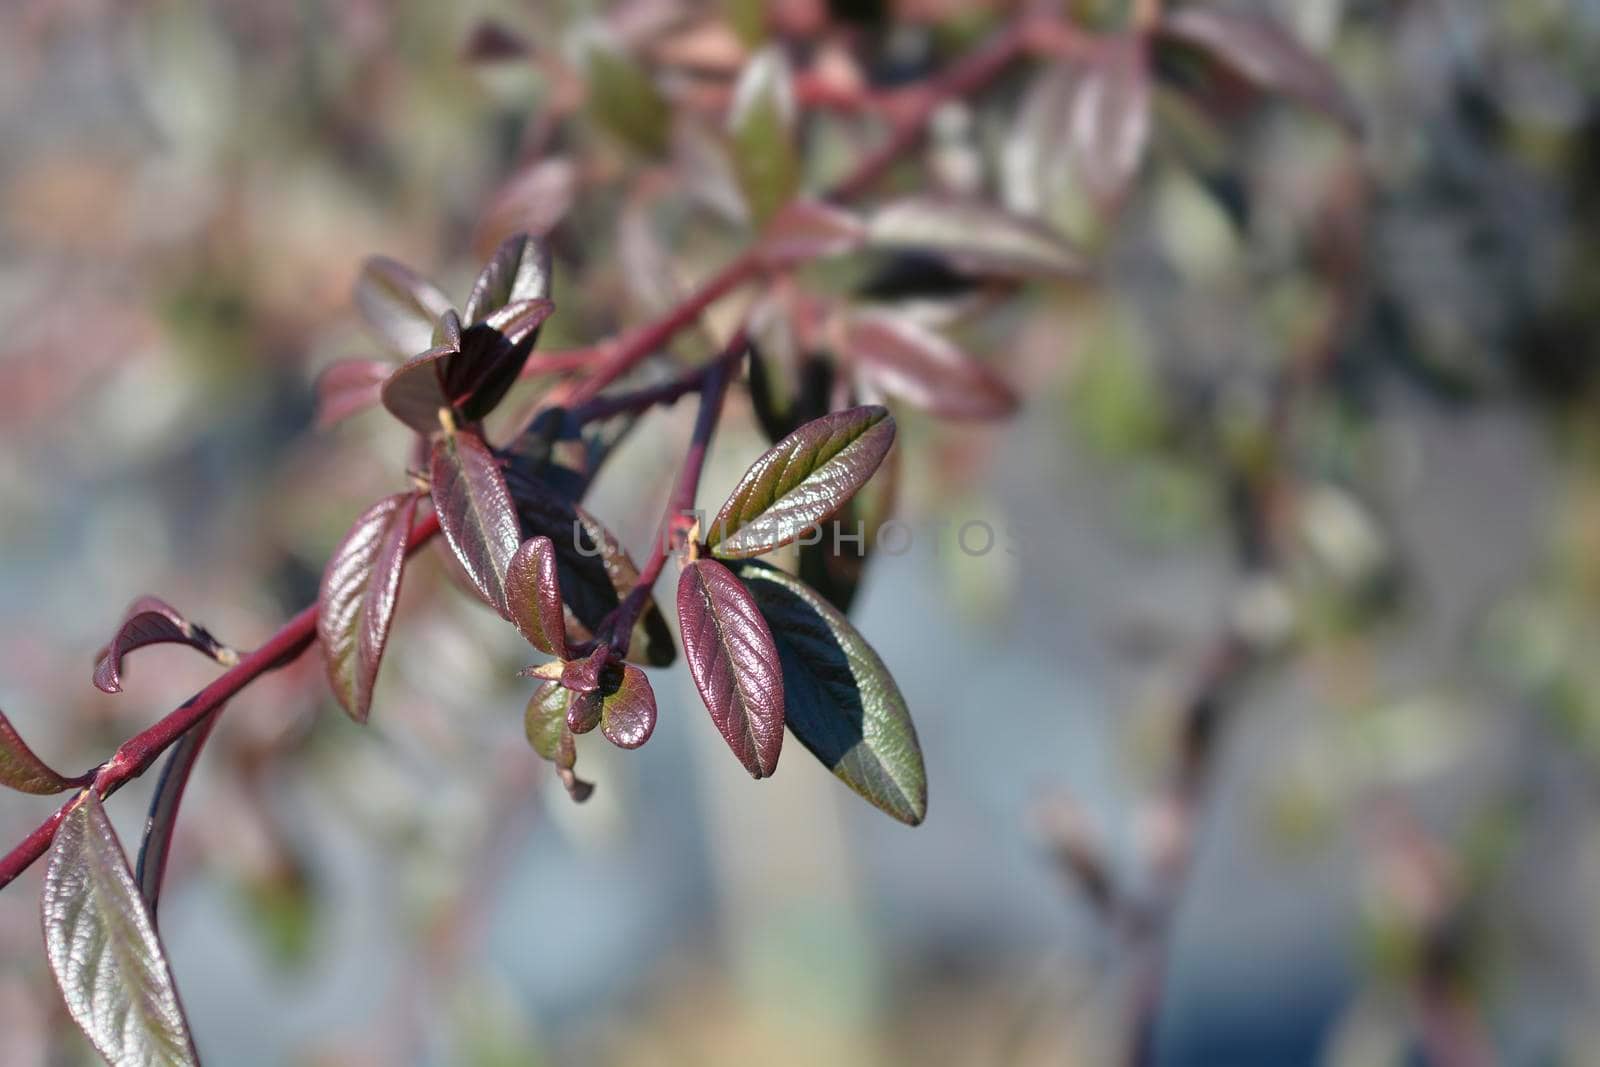 Willow-leaved cotoneaster branch - Latin name - Cotoneaster salicifolius Repens